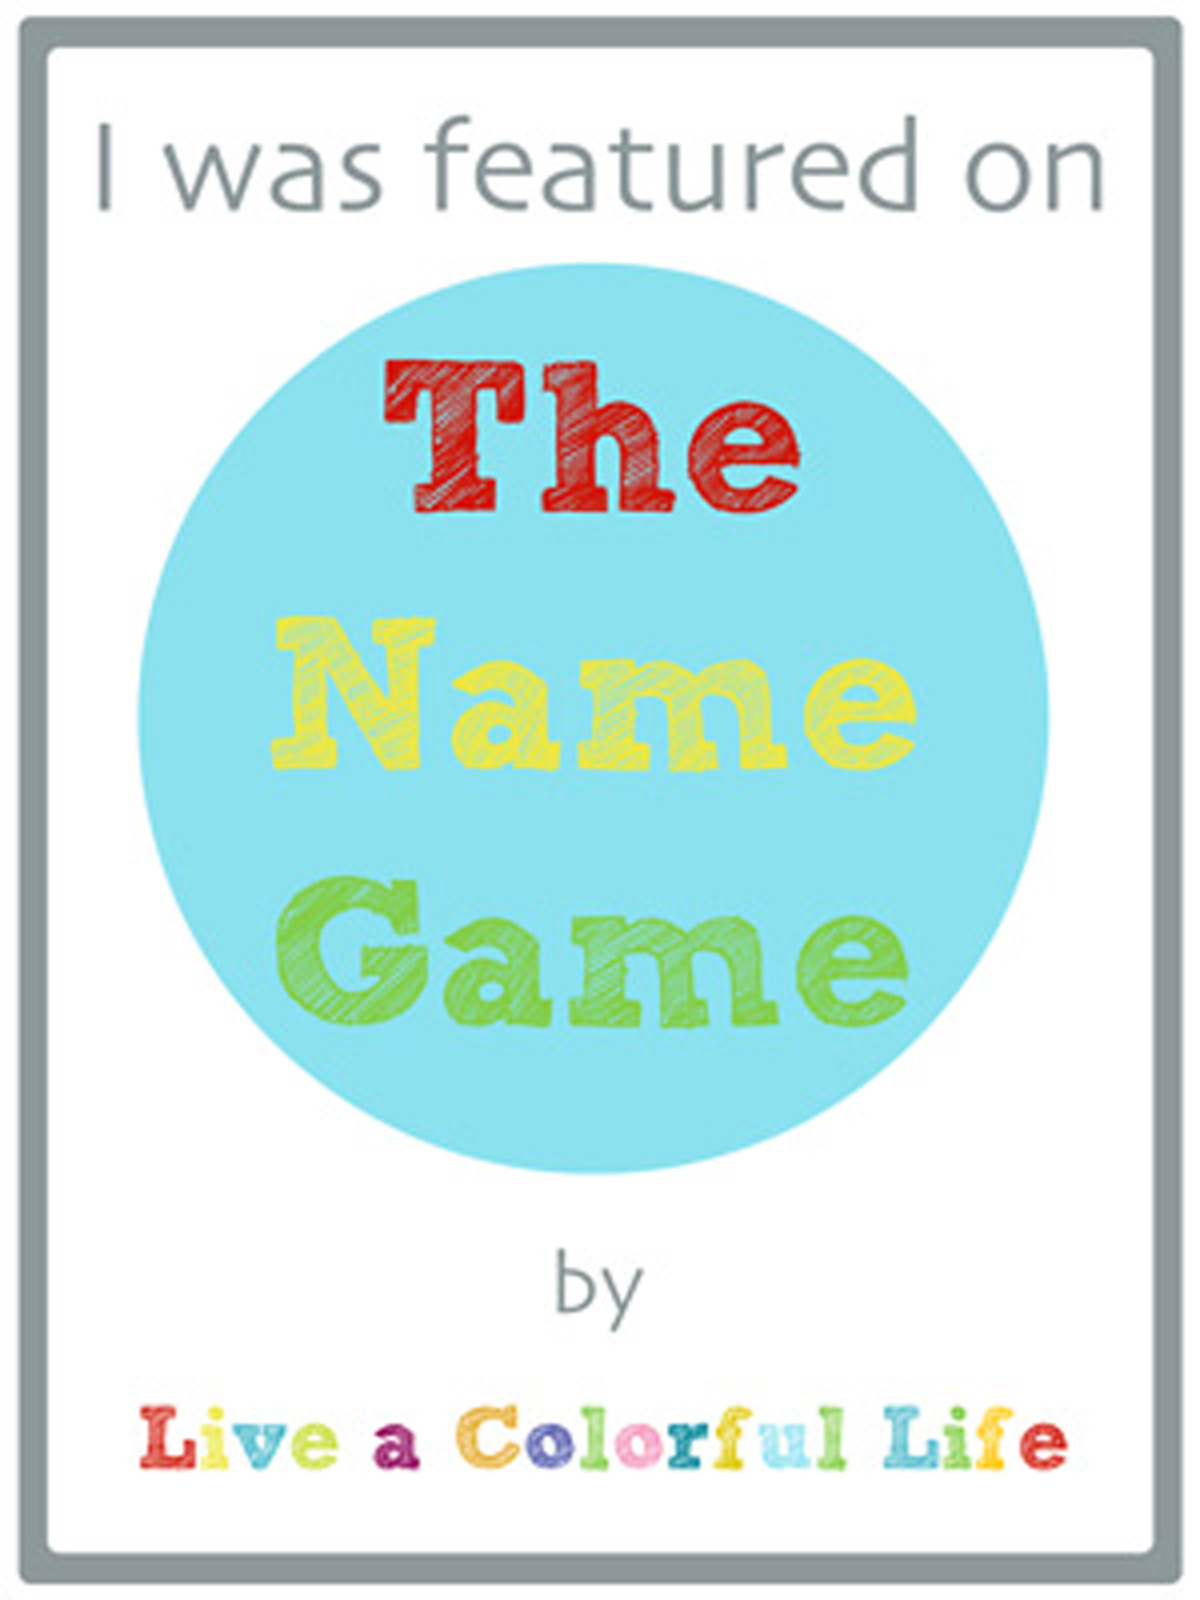 The Name Game